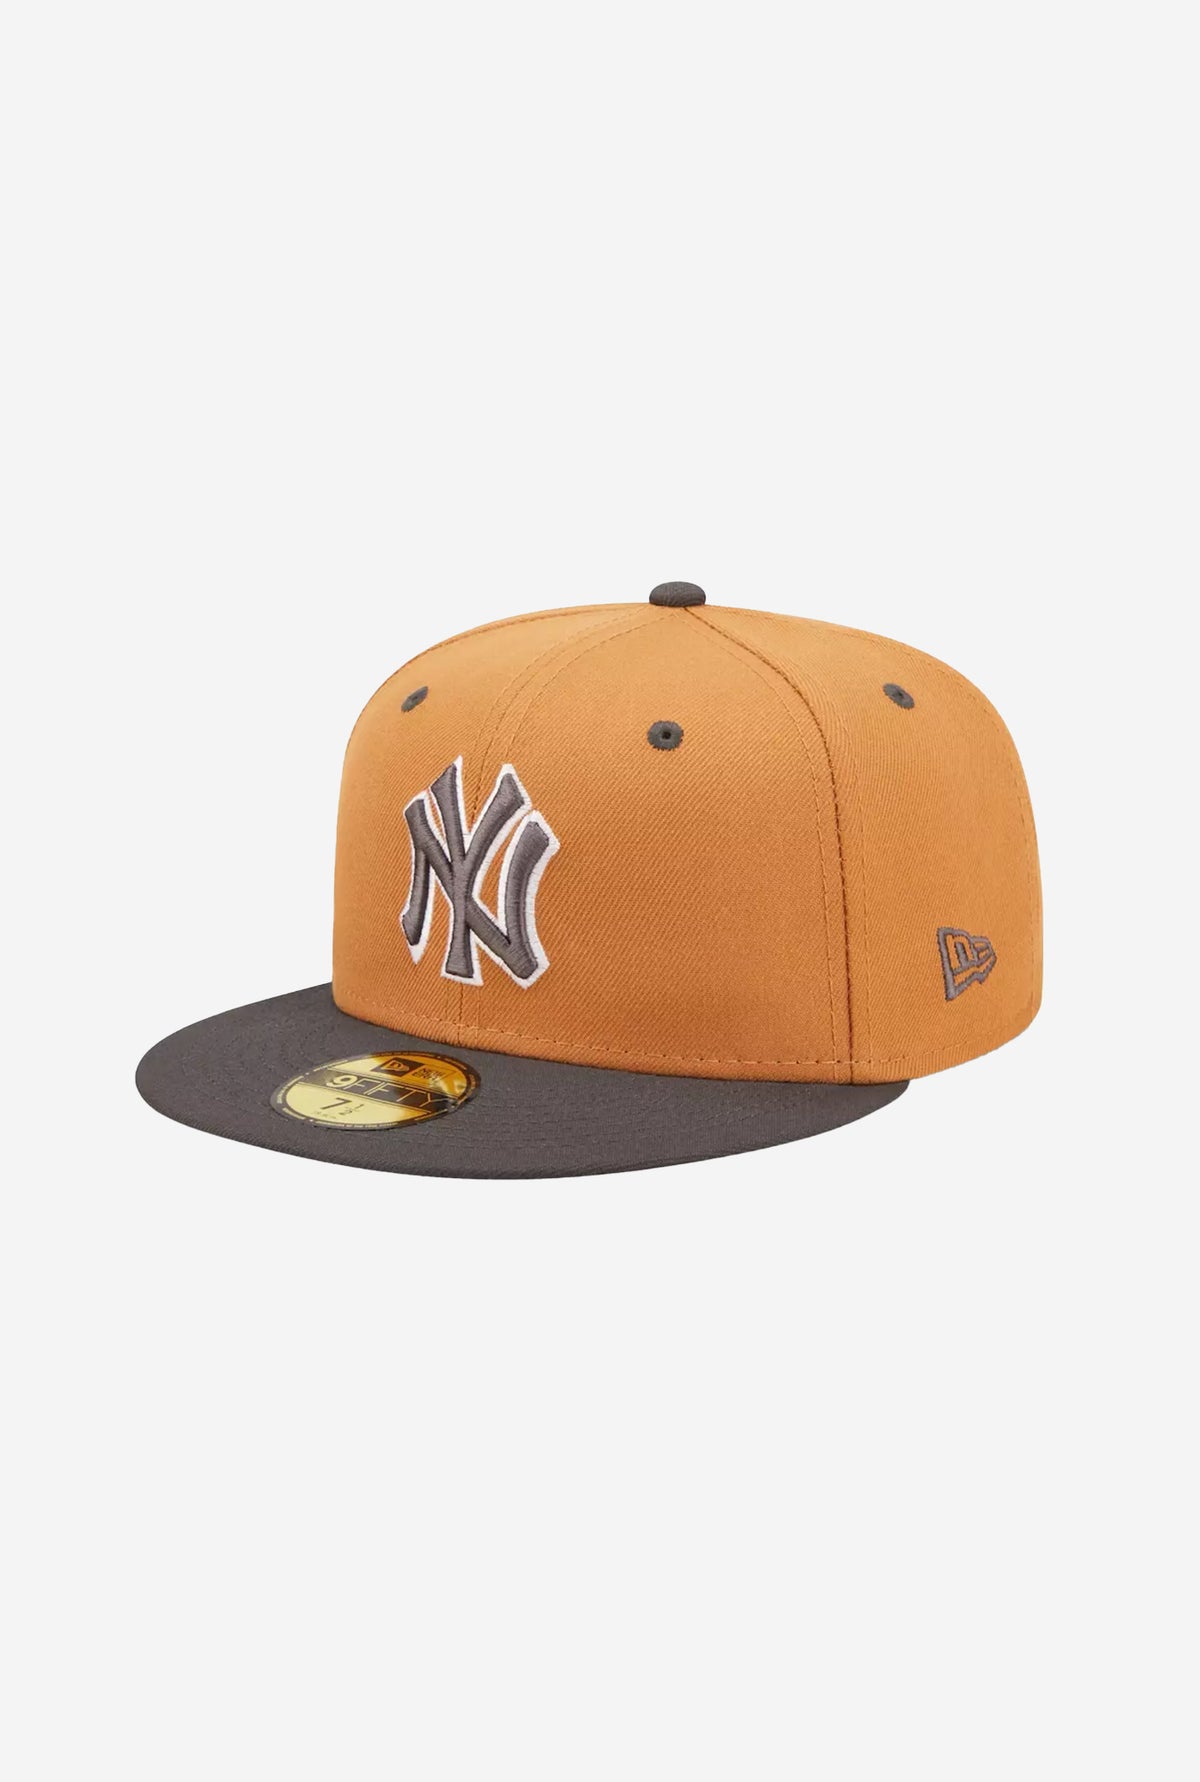 New York Yankees 9FIFTY 2-Tone Color Pack Snapback Hat - Tan/Grey